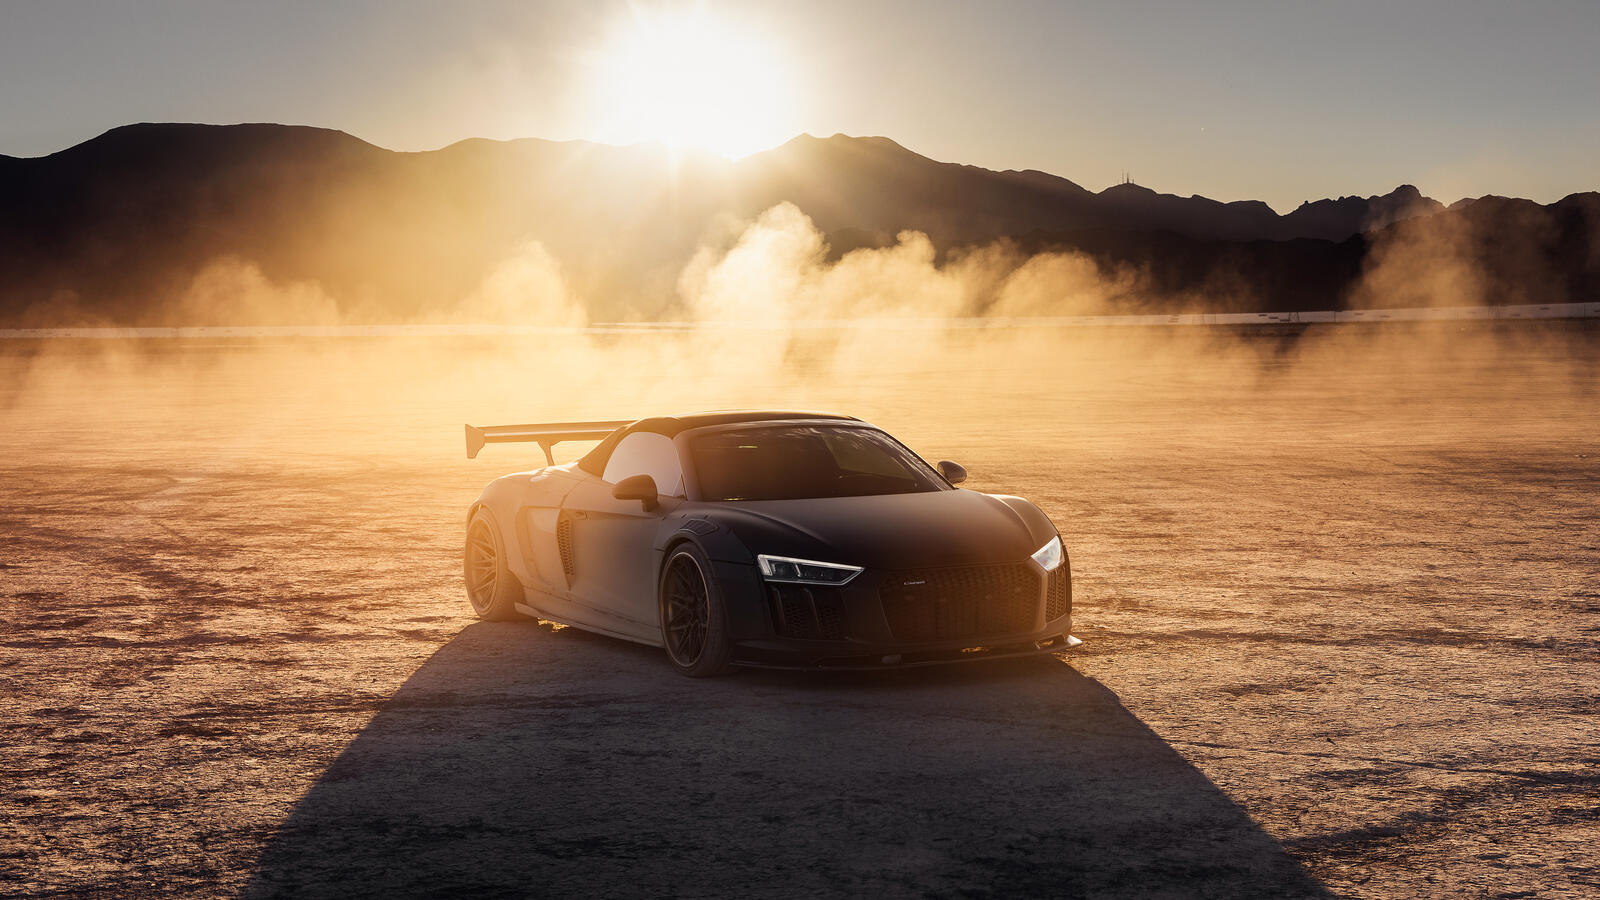 Free photo Audi R8 2021 on a dusty road